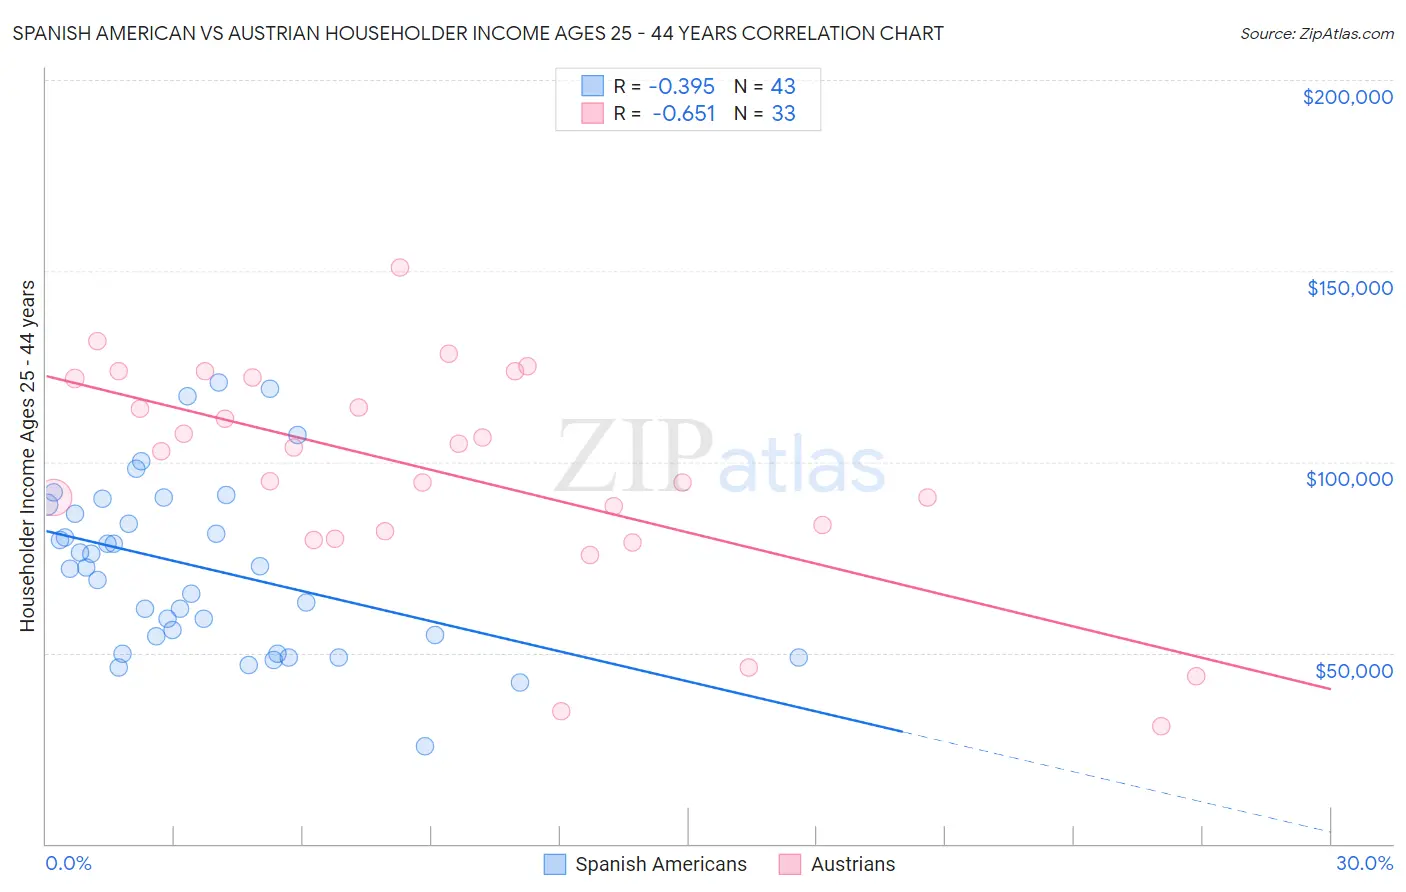 Spanish American vs Austrian Householder Income Ages 25 - 44 years